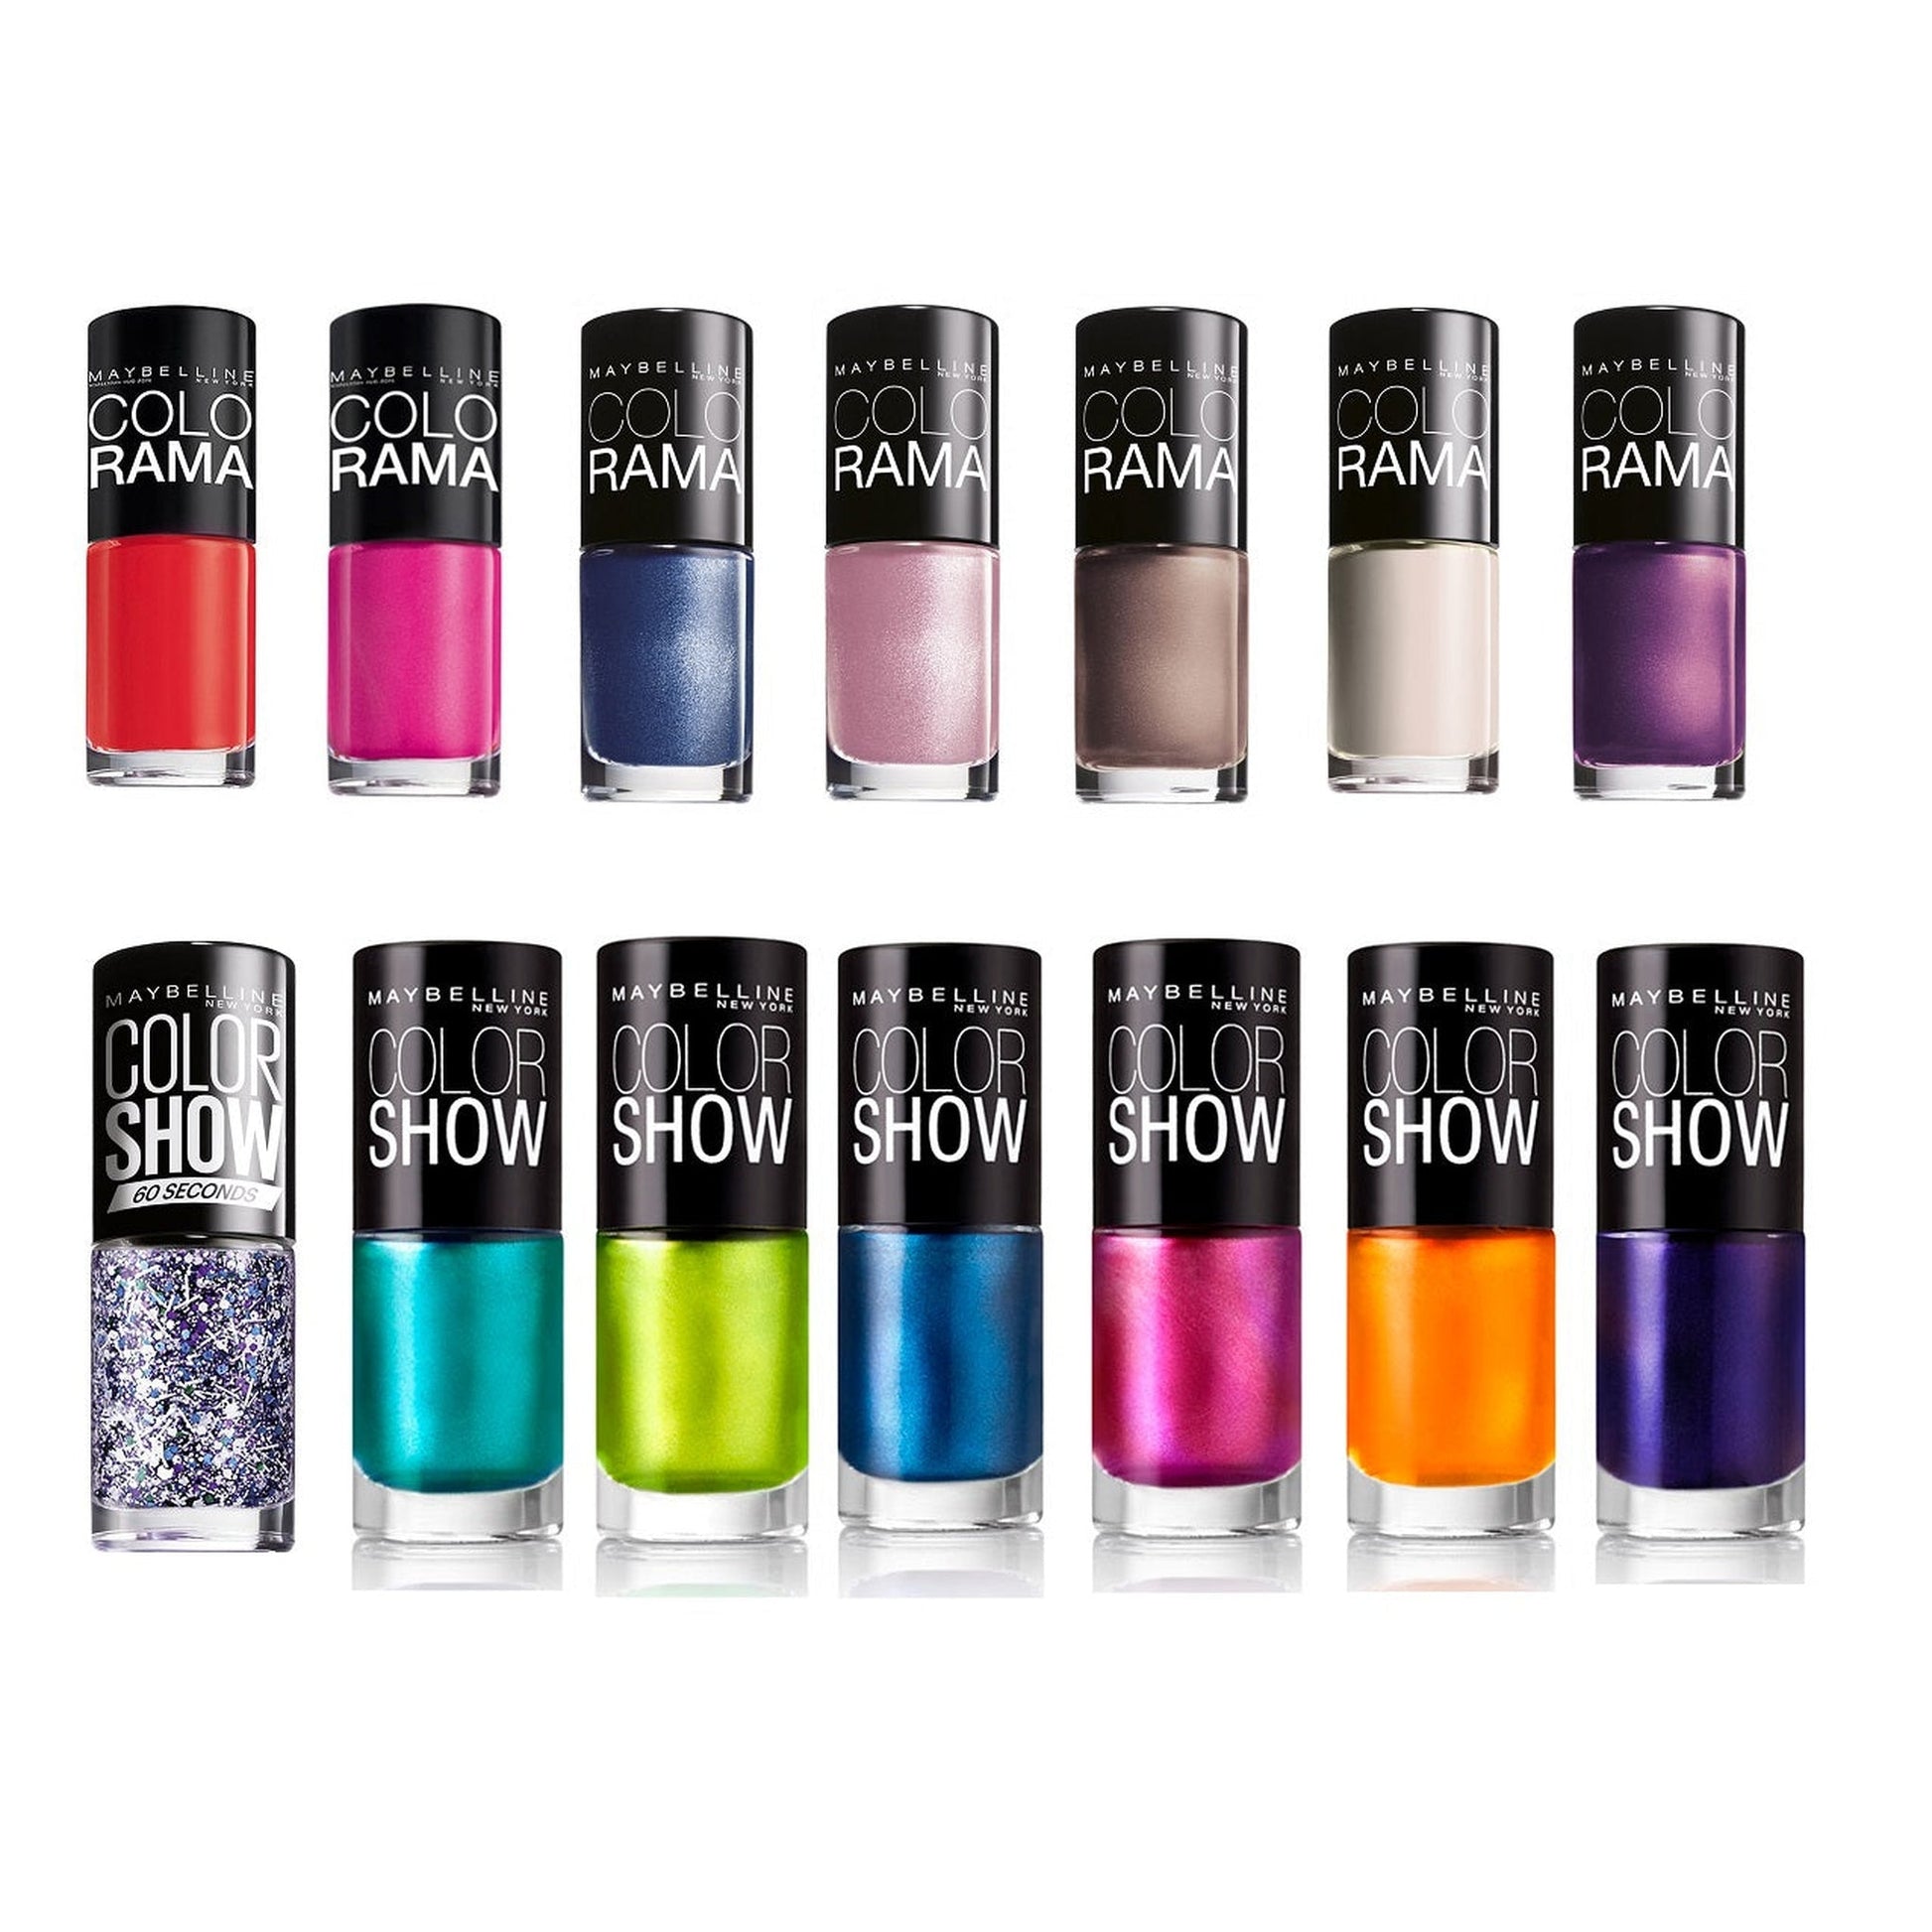 Maybelline Color Show Colorama Assorted Set of 10 Nail Polishes-Maybelline-BeautyNmakeup.co.uk